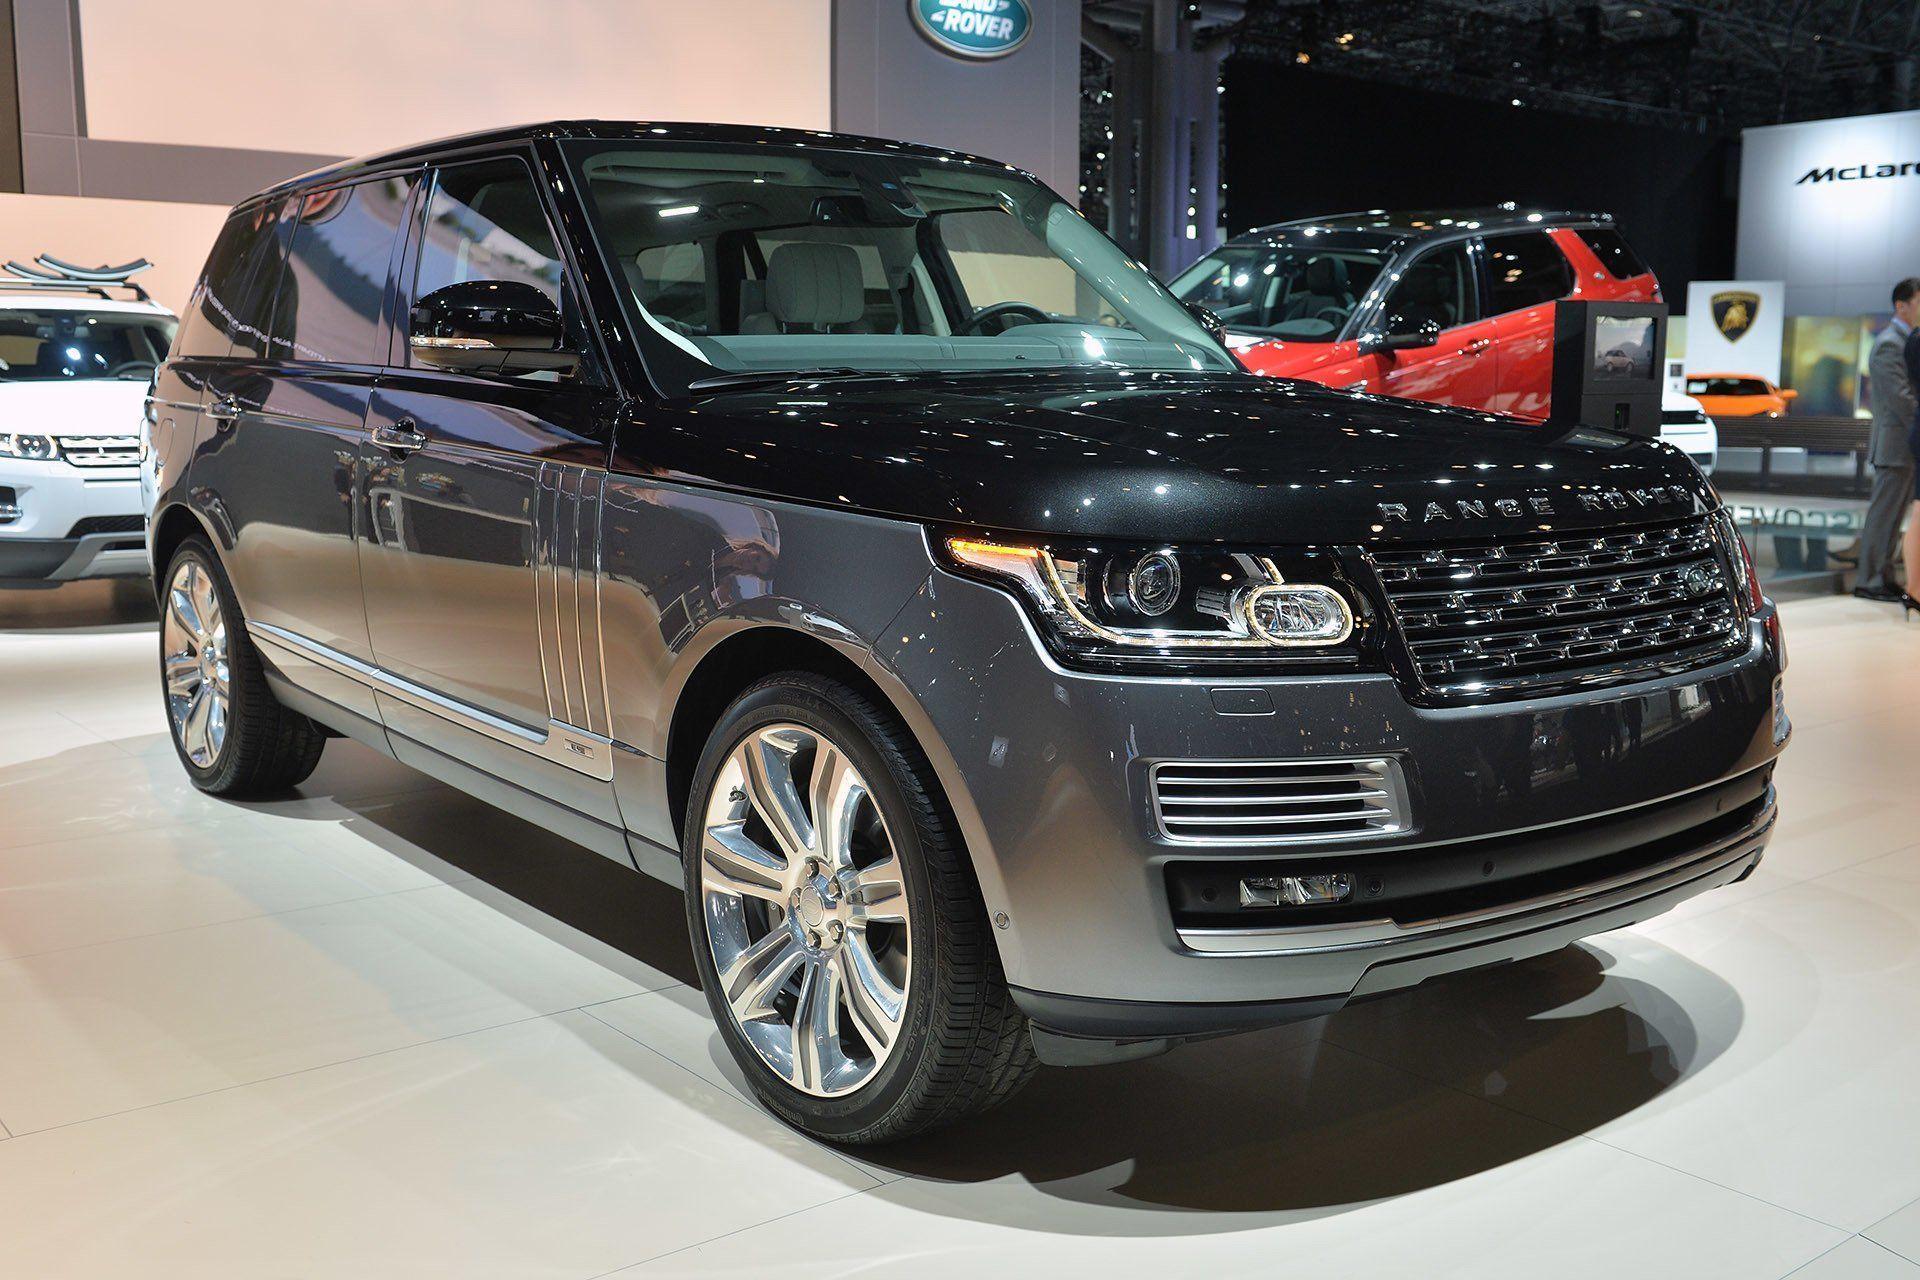 Range Rover SV Autobiography Free Image. New Car Concepts